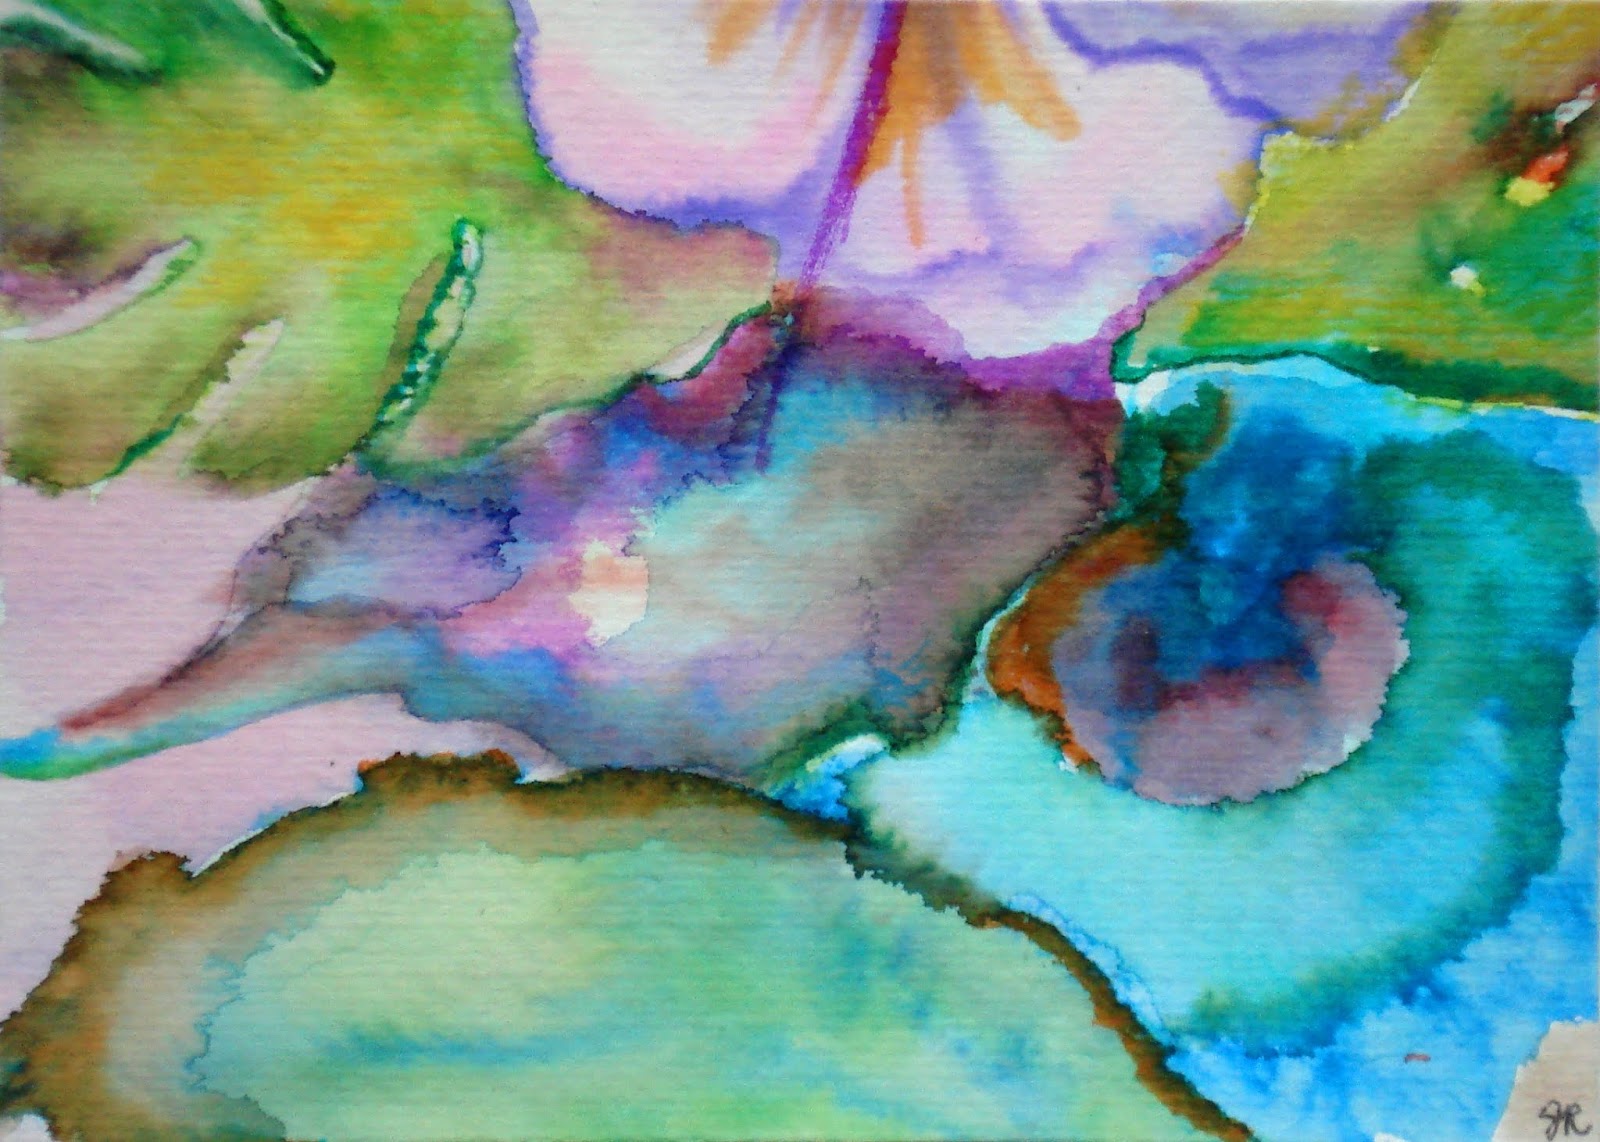 Mail me some art: Watercolors - Part 1